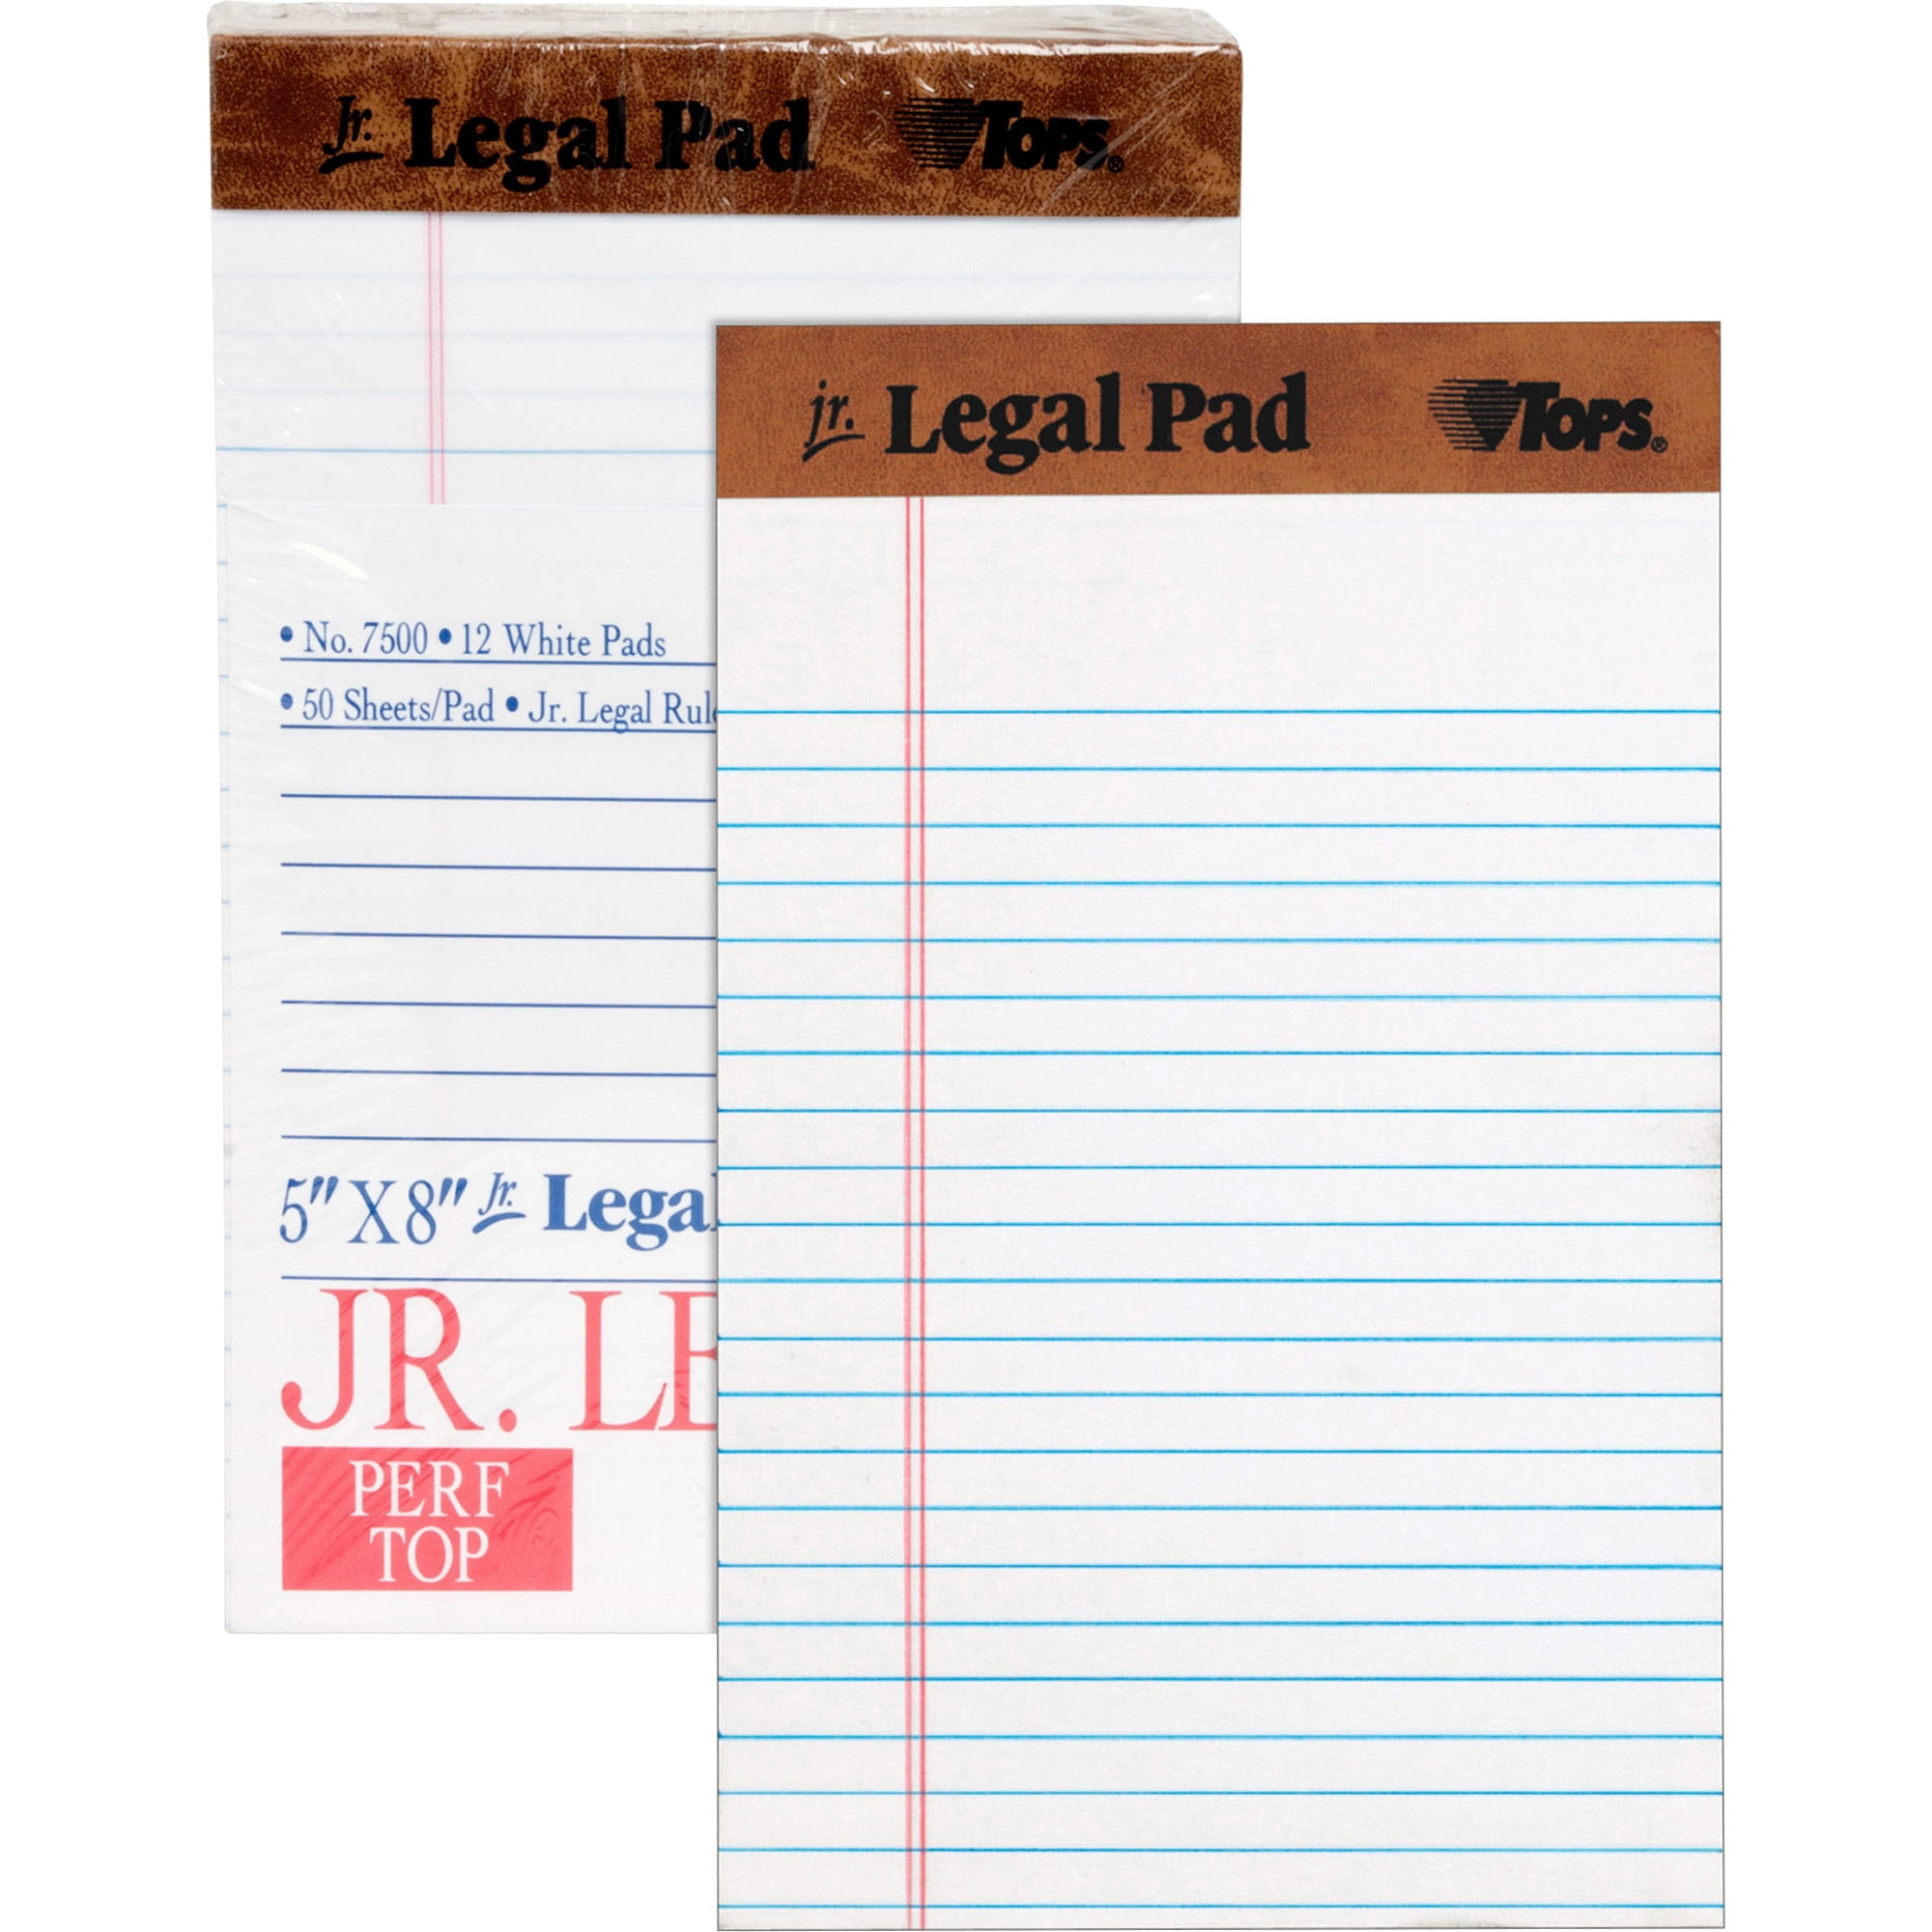 TOPS The Legal Pad Legal Pad 50 Sheets per Pad 75337 White 3 Pads per Pack Perforated 8-1/2 x 11-3/4 Inches Legal/Wide Rule 